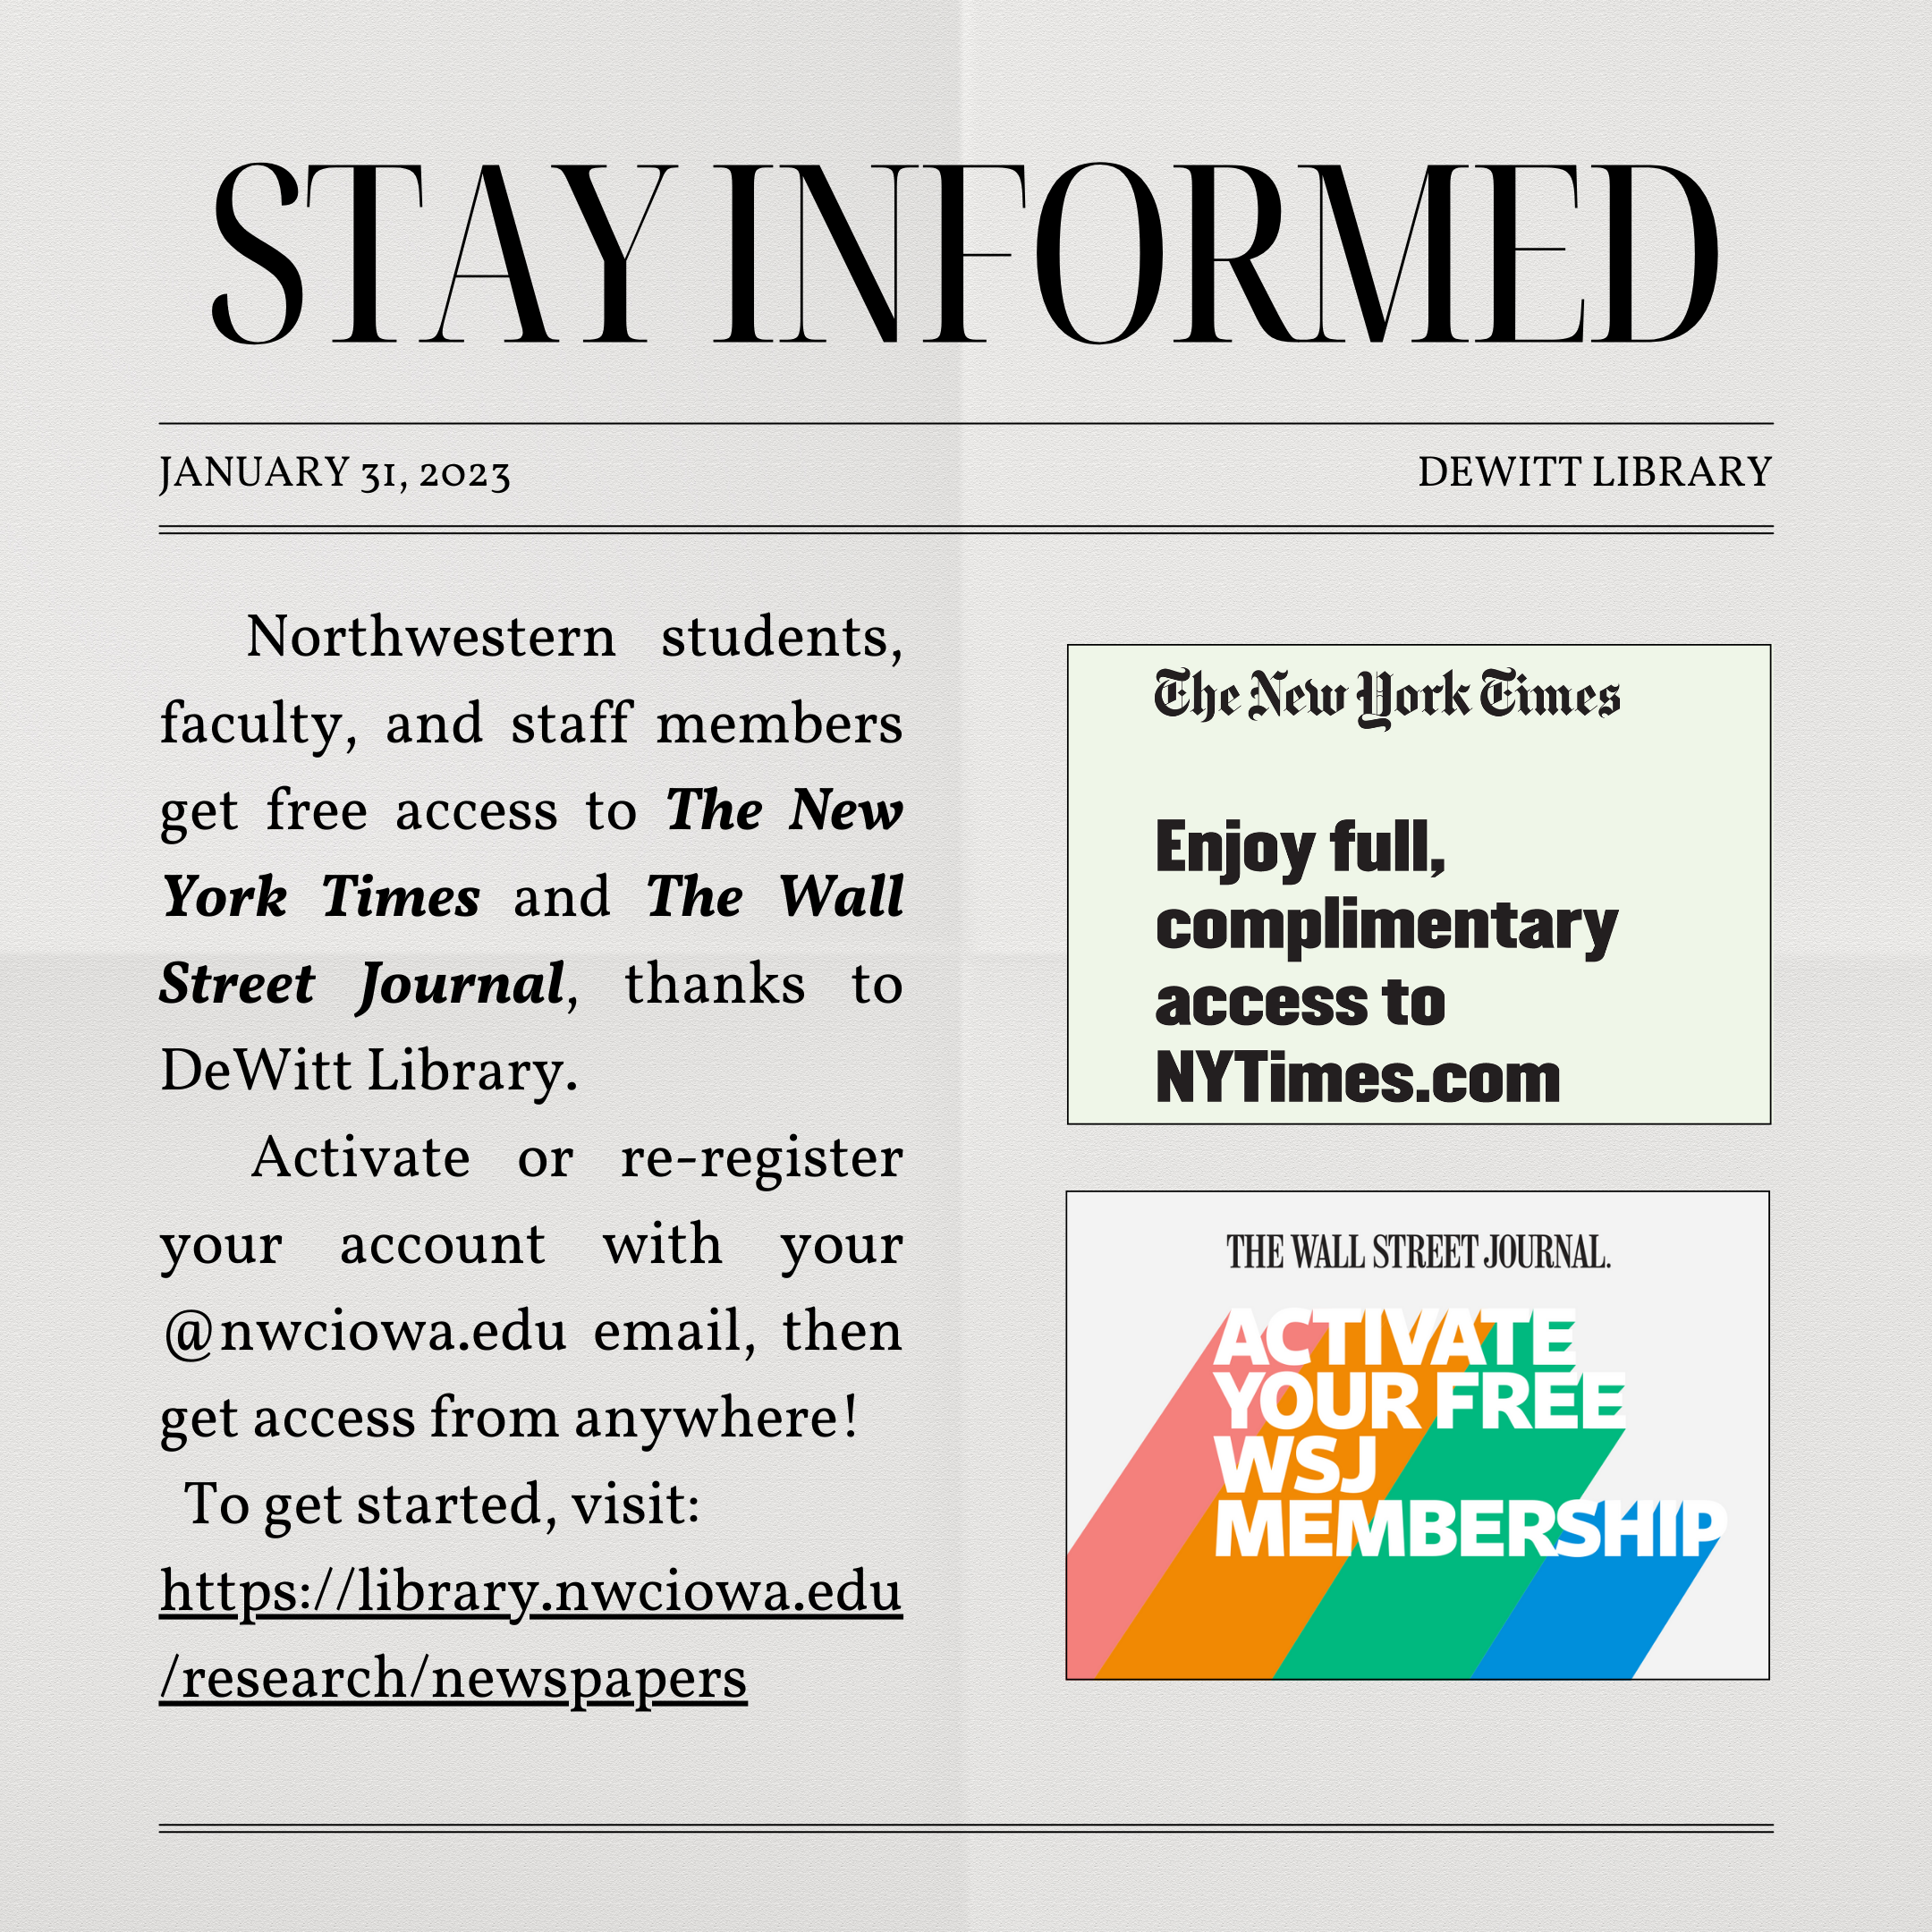 Stay Informed: Northwestern students, faculty, and staff members get free access to The New York Times and The Wall Street Journal, thanks to DeWitt Library.   Activate or re-register your account with your @nwciowa.edu email, then get access from anywhere!   To get started, visit:  https://library.nwciowa.edu/research/newspapers